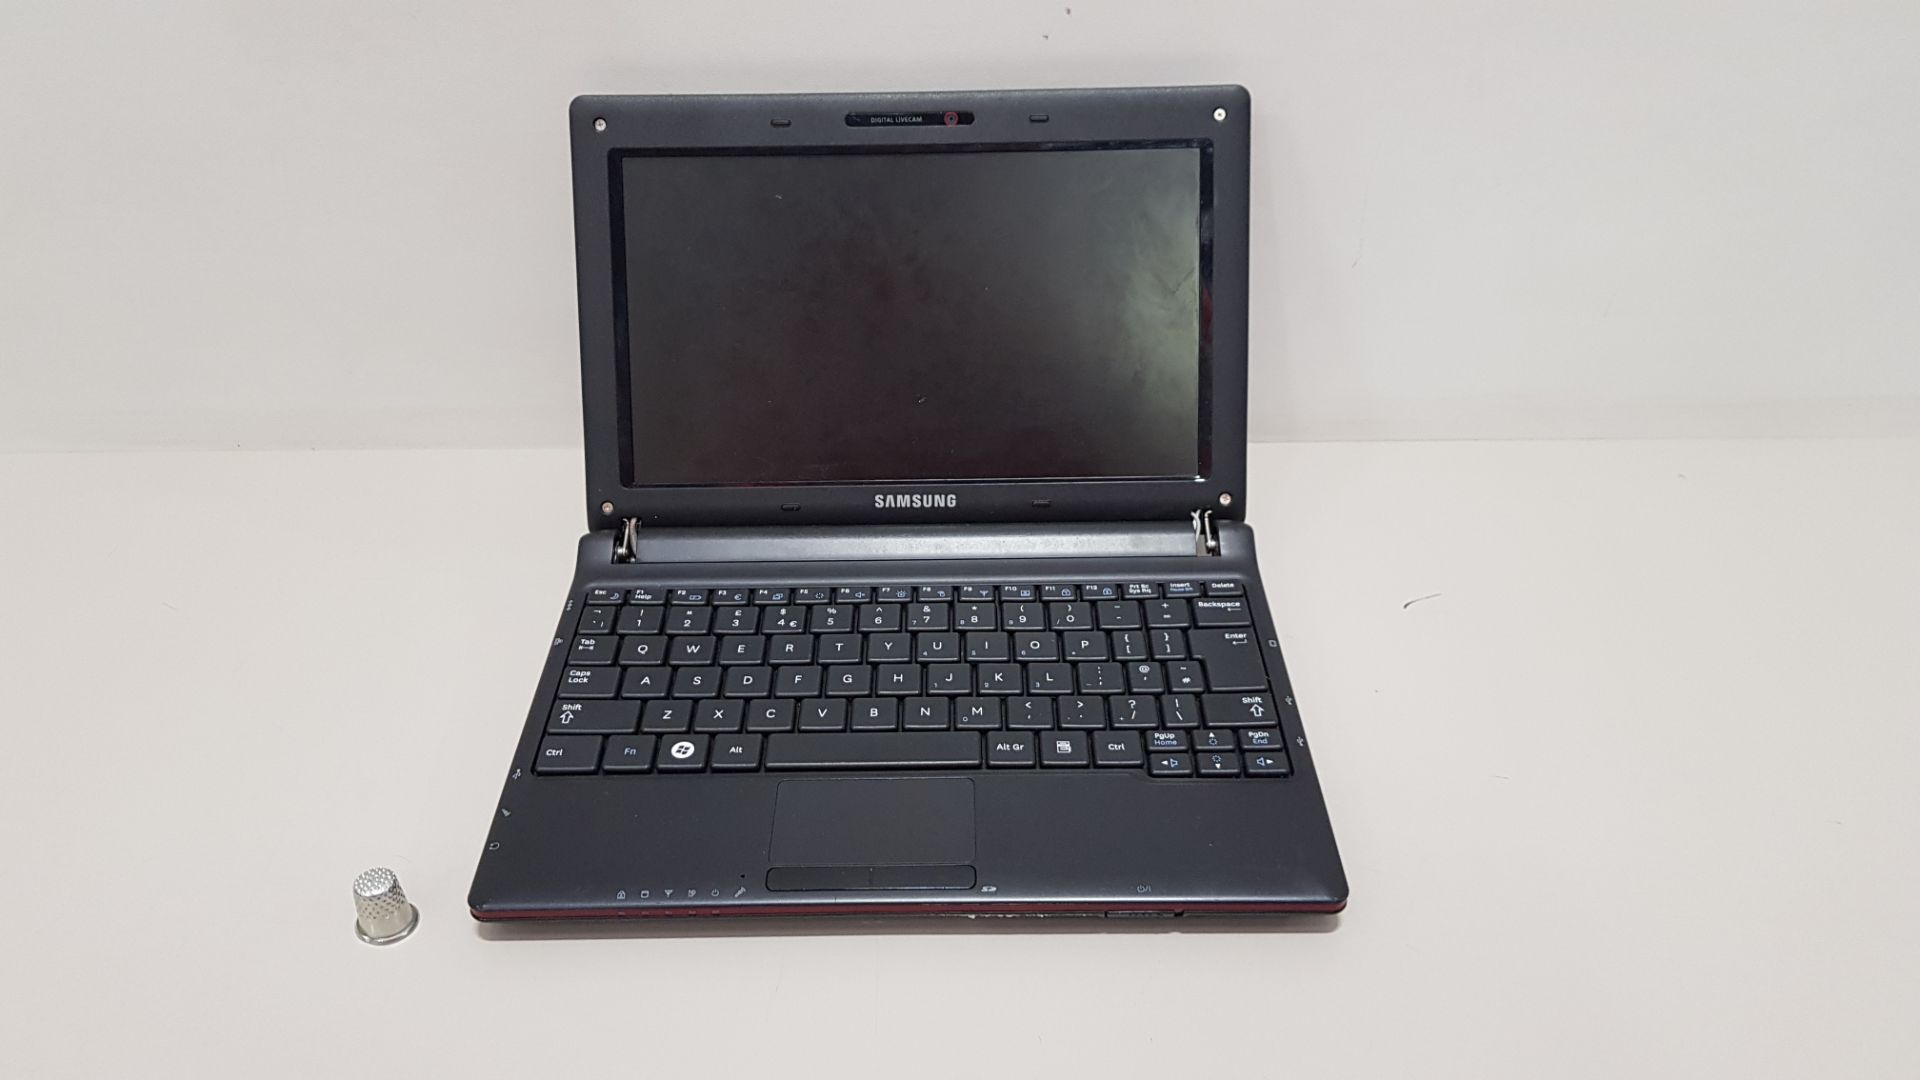 SAMSUNG N145 PLUS LAPTOP WINDOWS 7 - WITH CHARGER